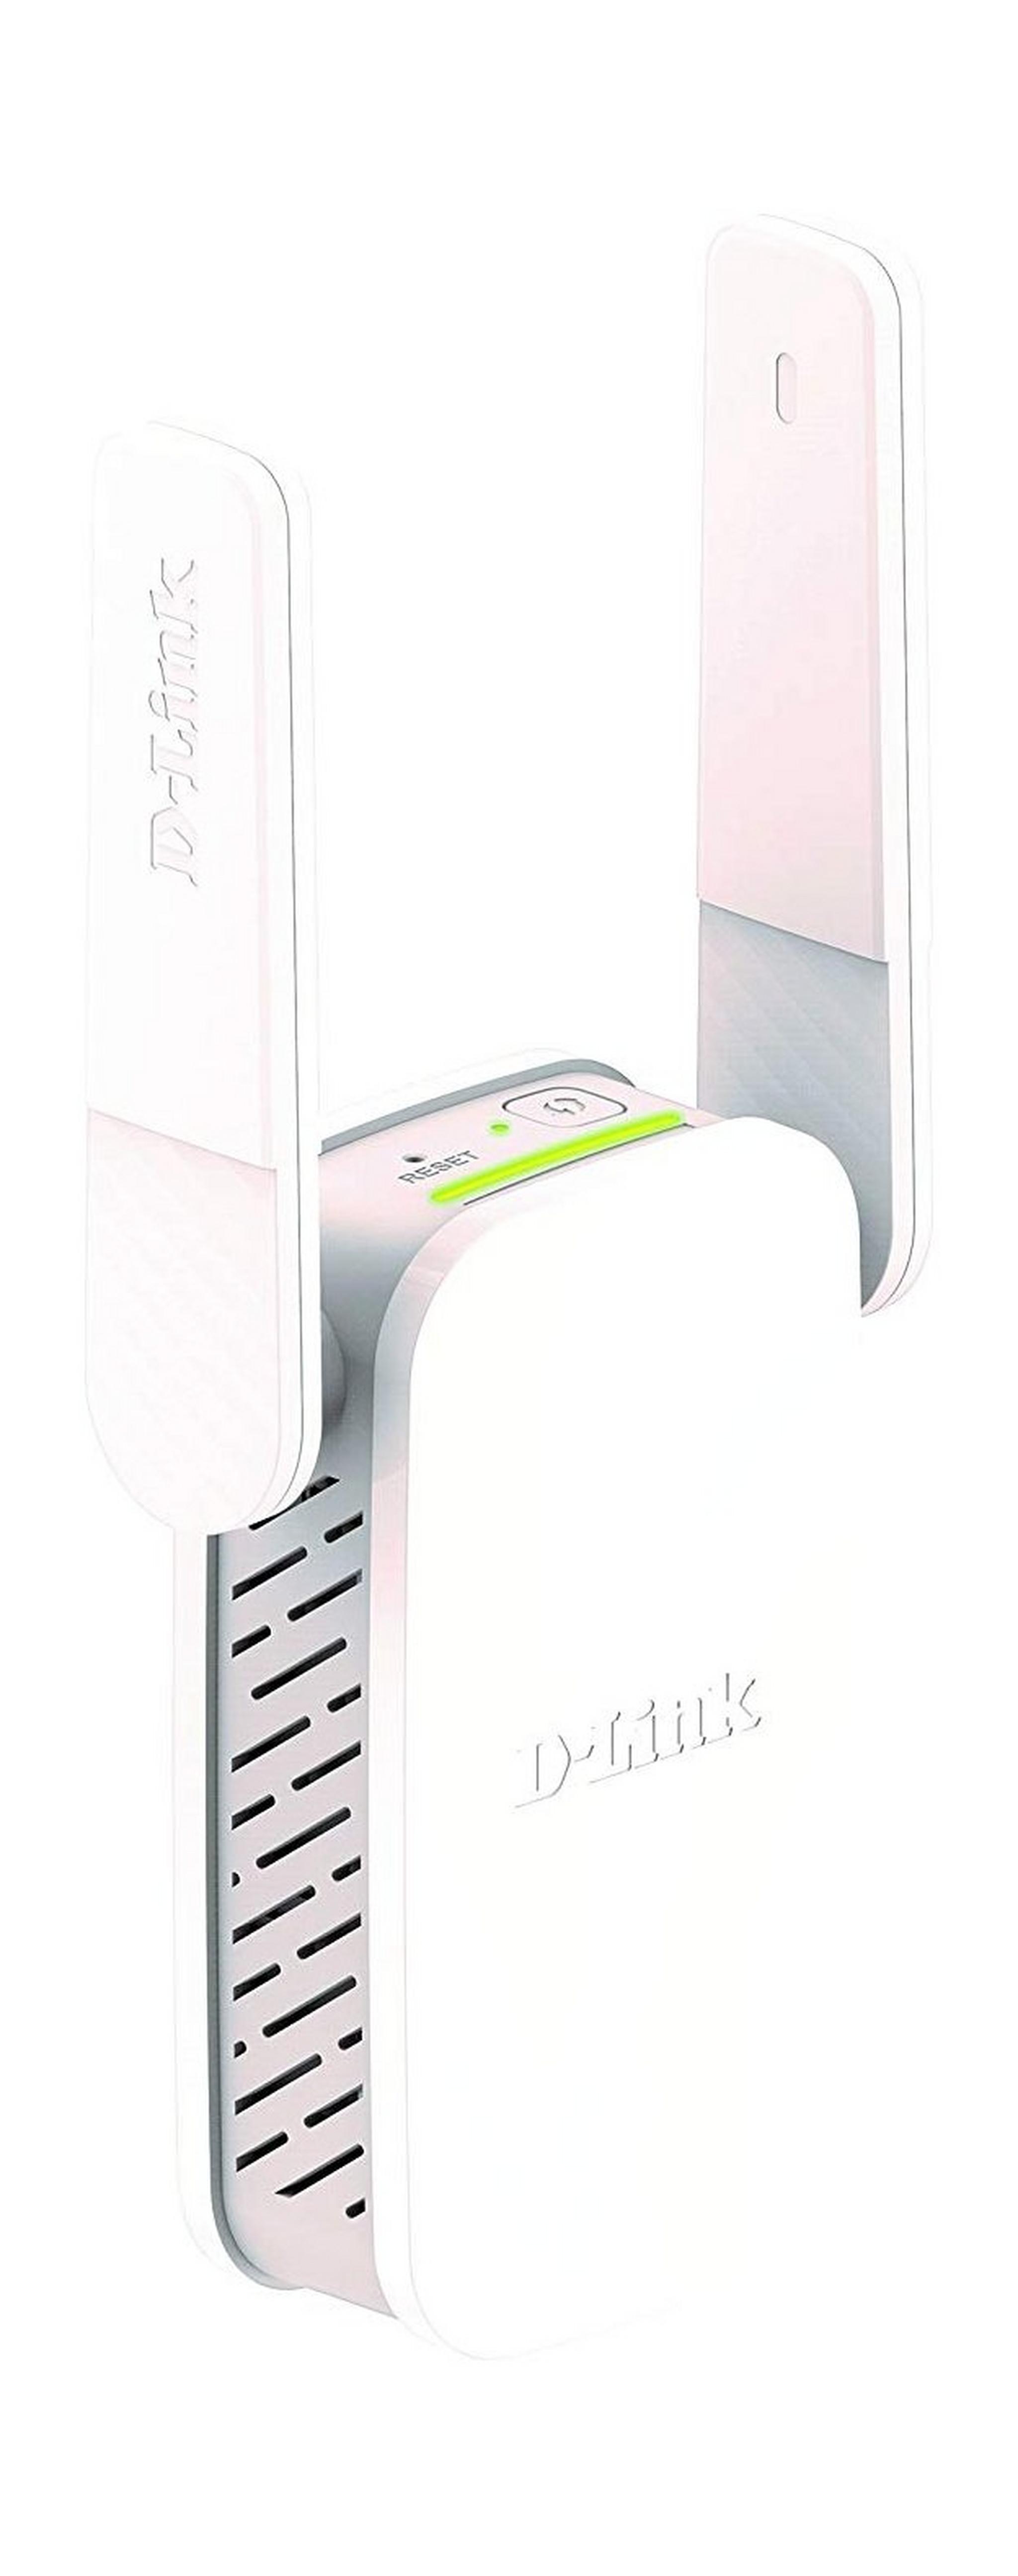 D-Link AC750 Dual Band Wi-Fi Range Extender with Fast Ethernet Port - (DAP-1530)